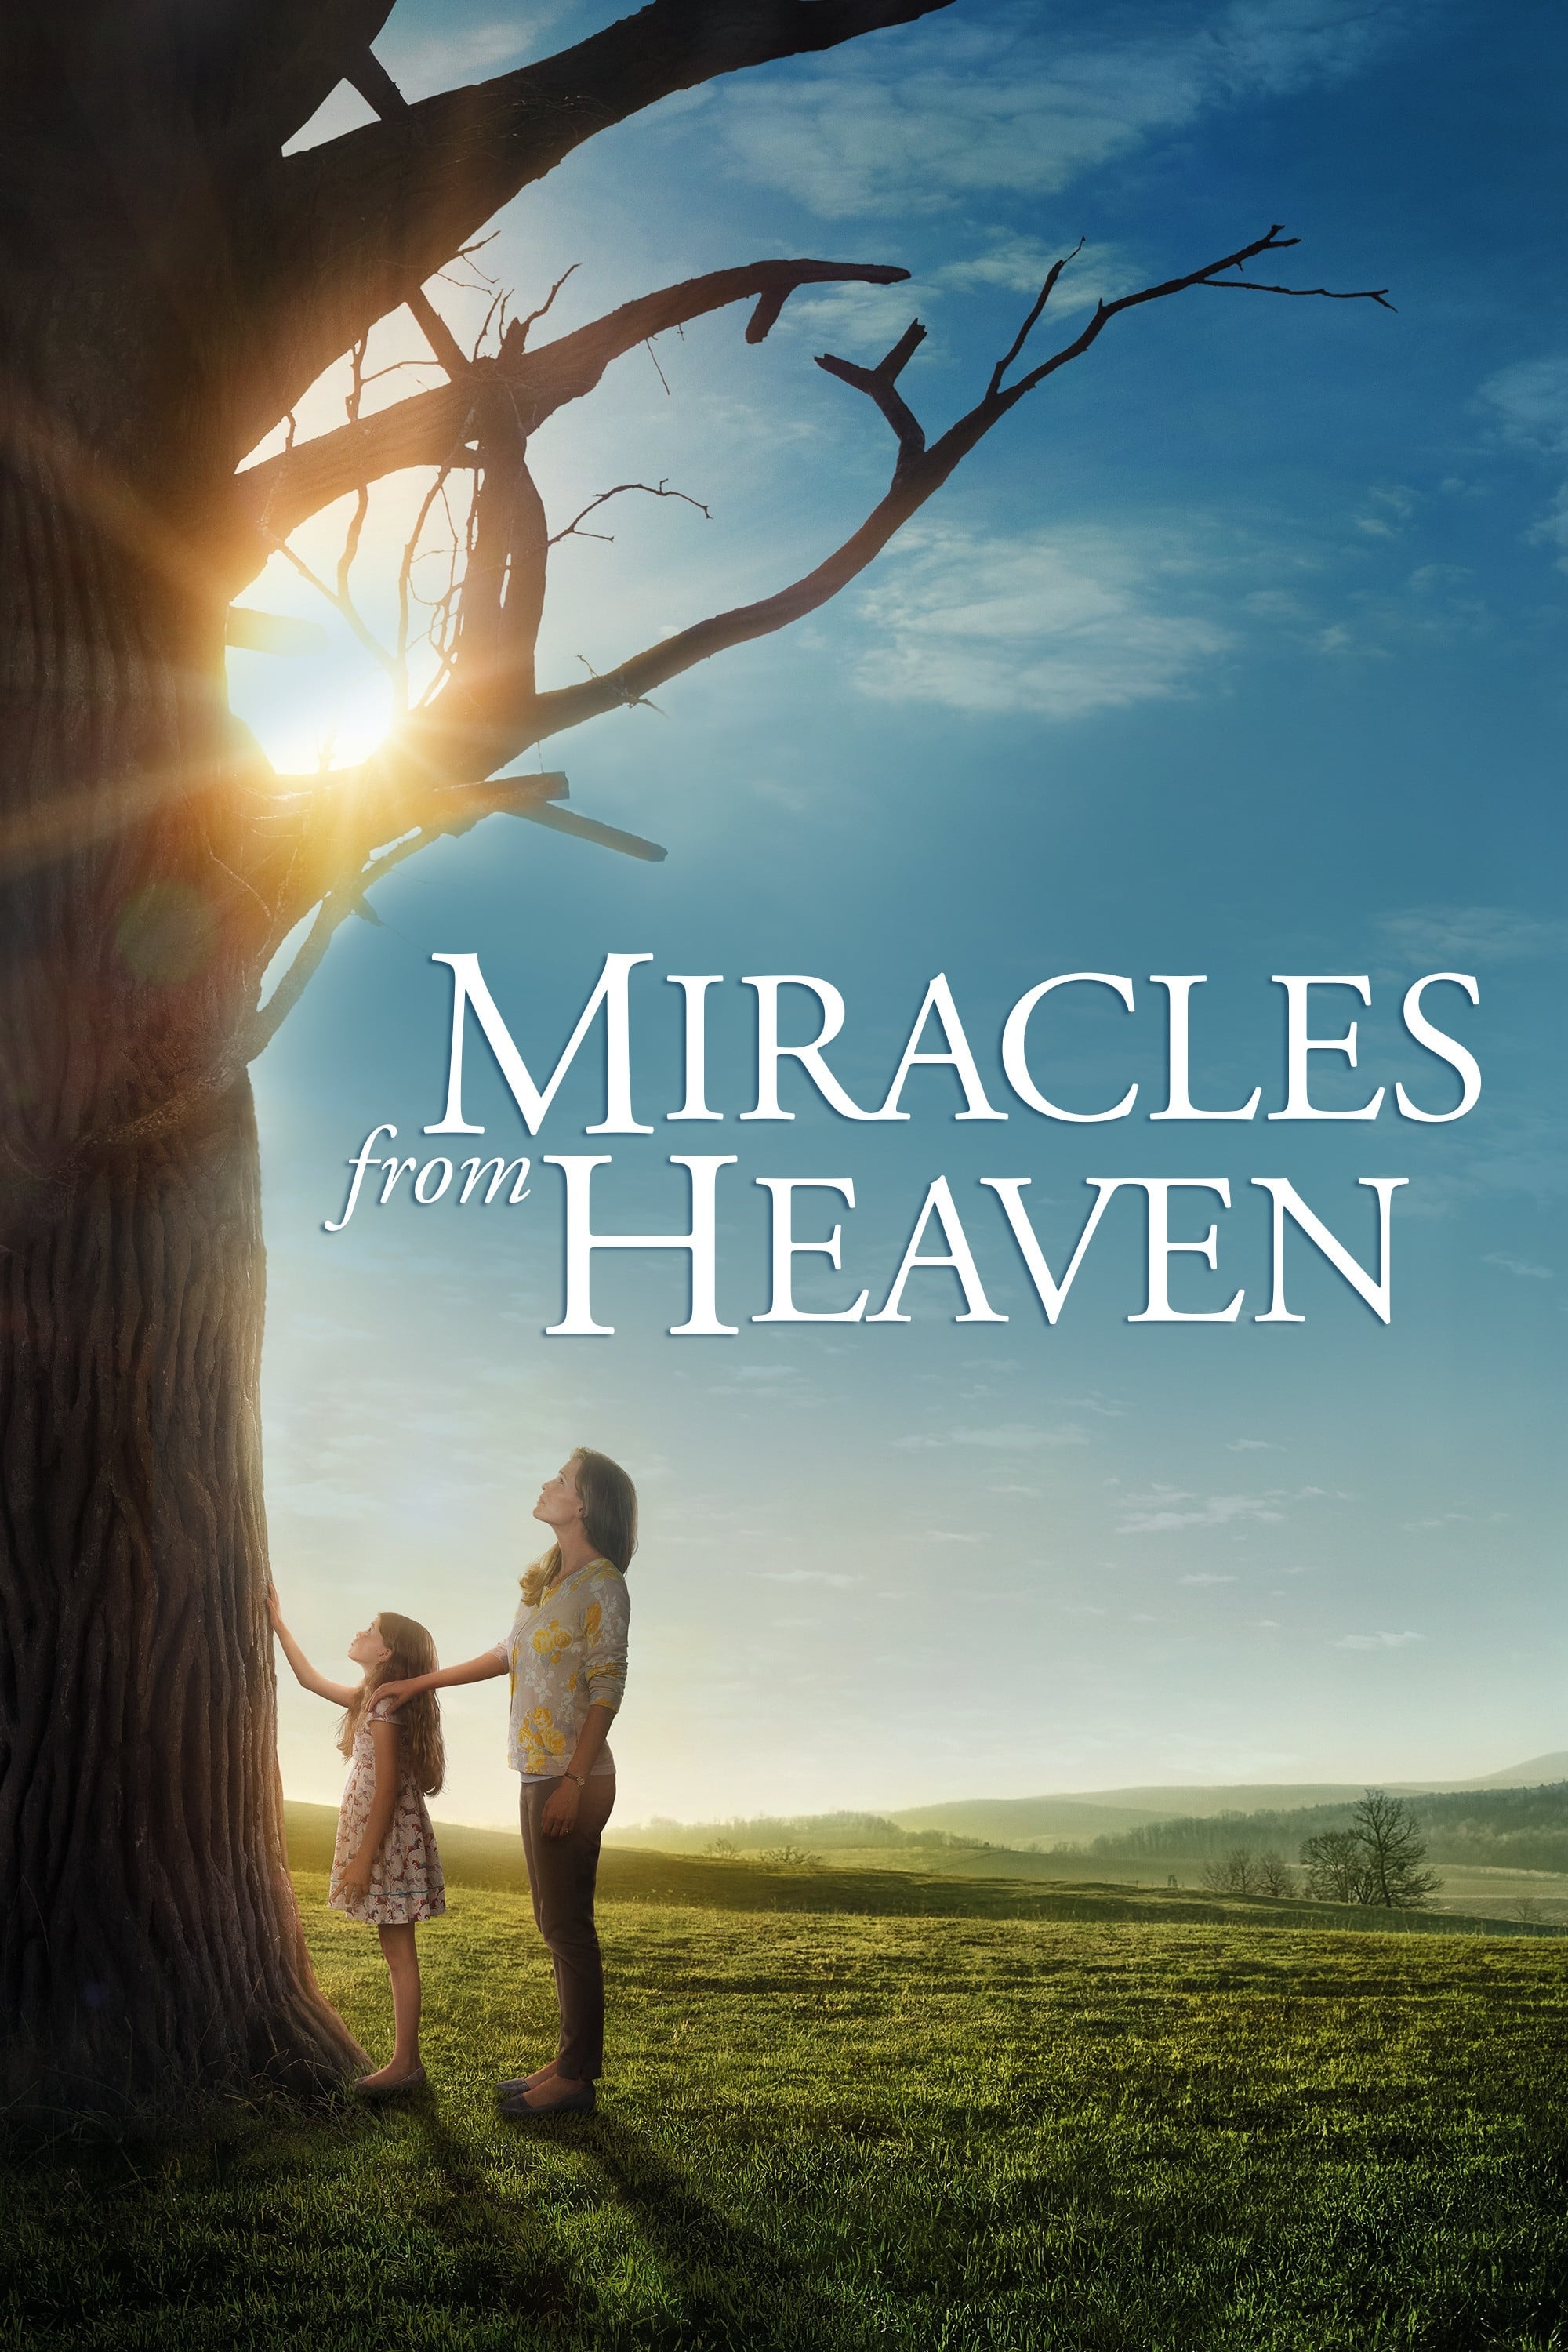 Miracles from Heaven, Full movie online, Plex streaming, Emotional experience, 2000x3000 HD Phone